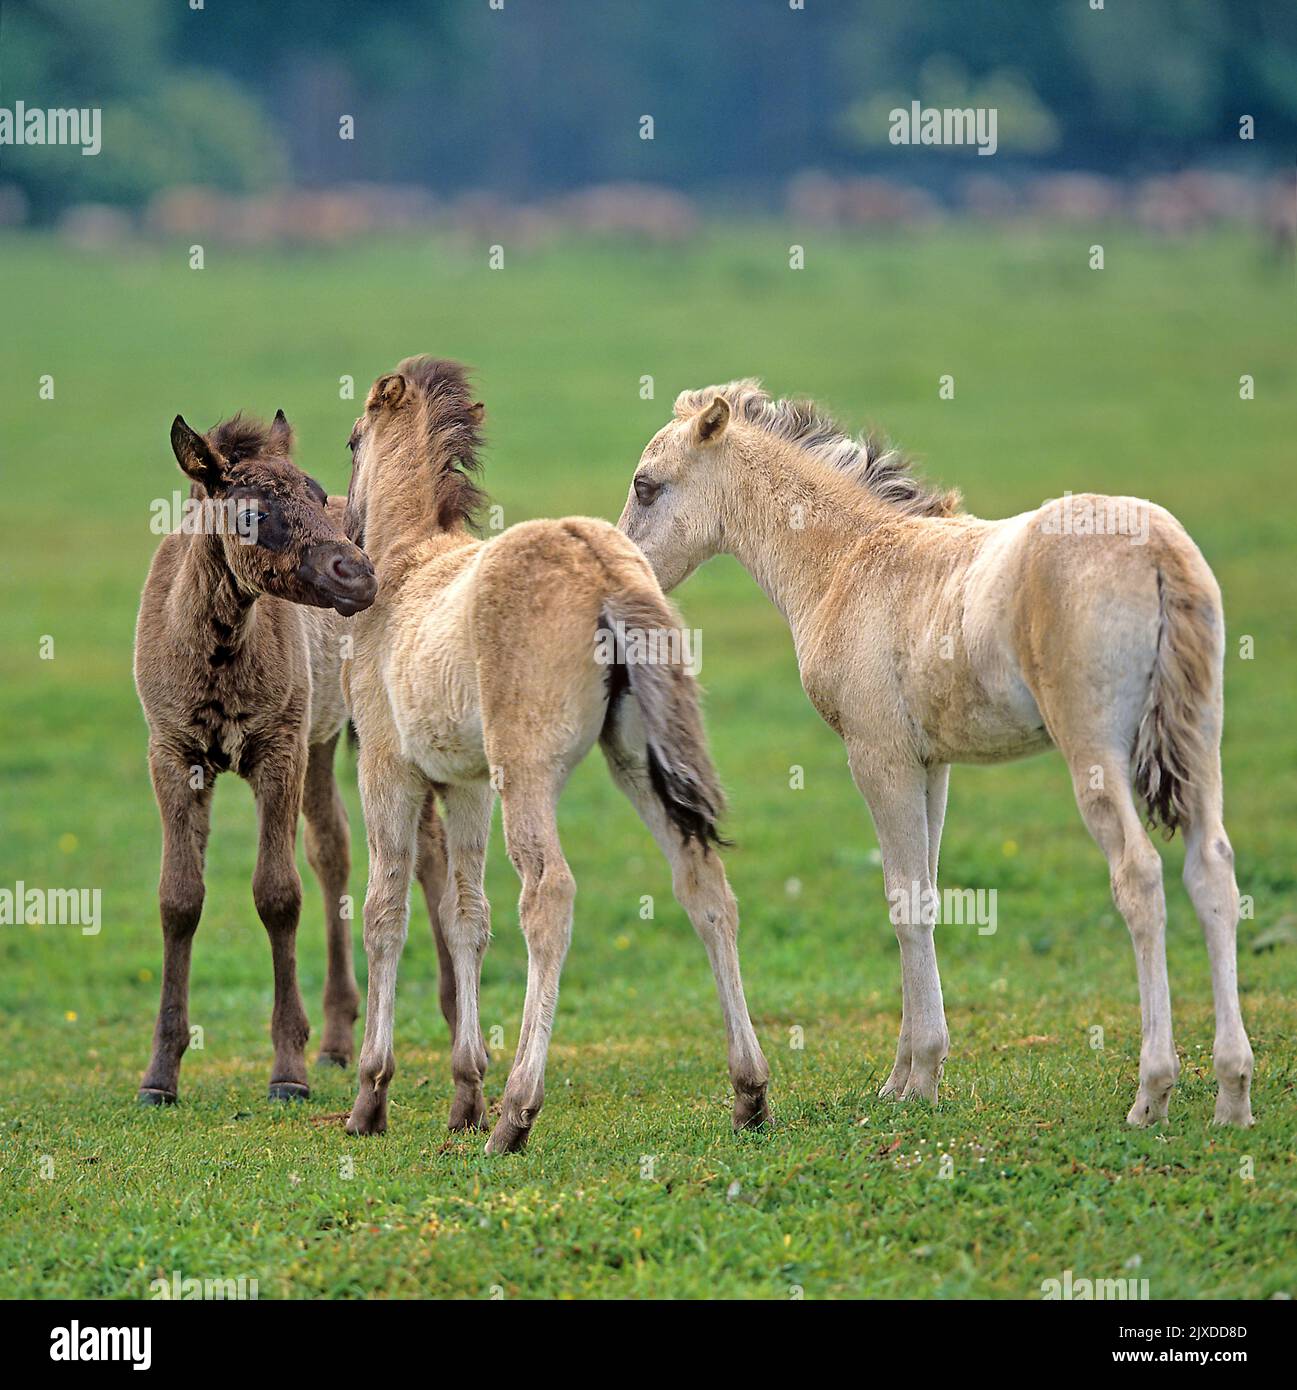 Duelmen Pony,. Three foals greet each other, get to know each other, sniff each other, new friends. Duelmen, Meerfelder Bruch, North Rhine-Westphalia. Germany Stock Photo